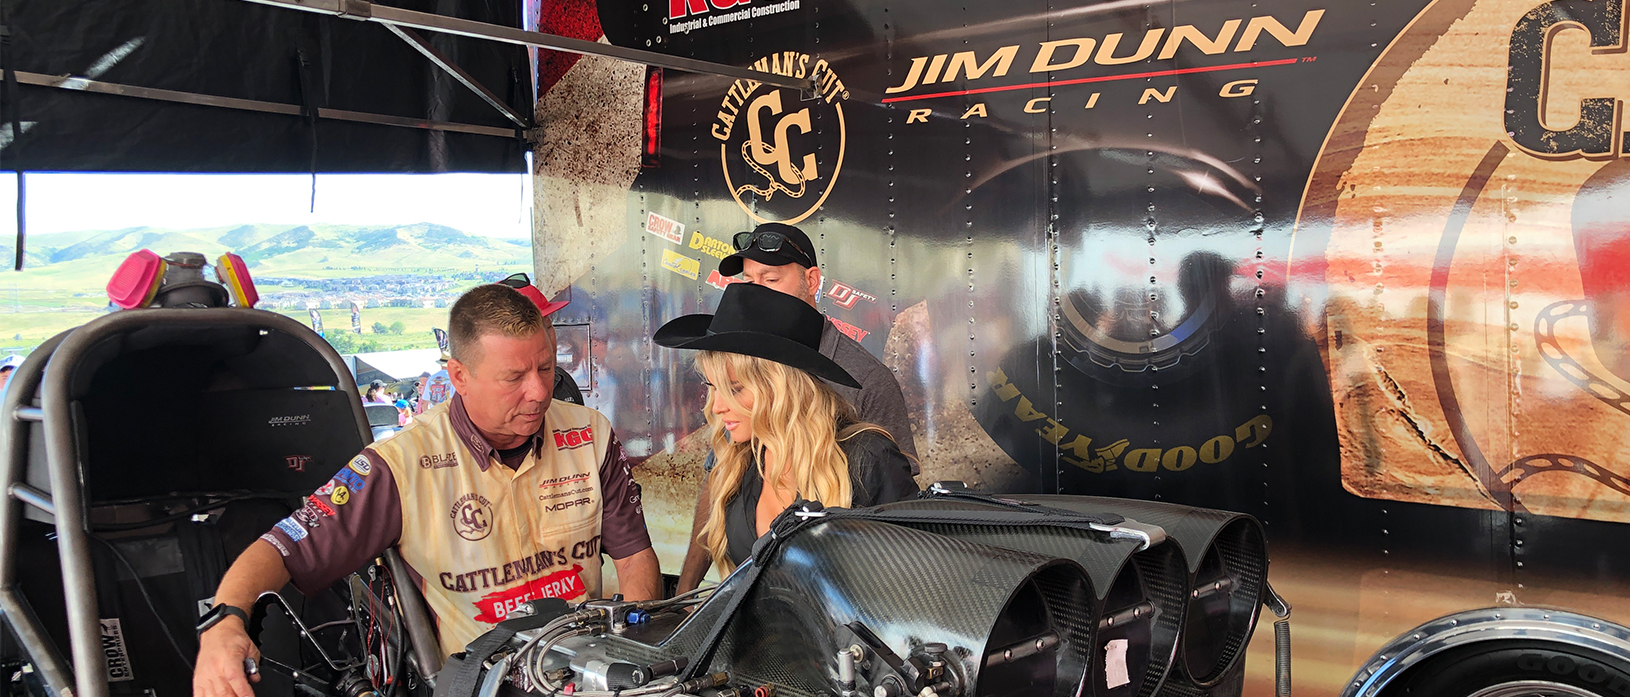 Behind the scenes with carmen electra and Jim dunn racing